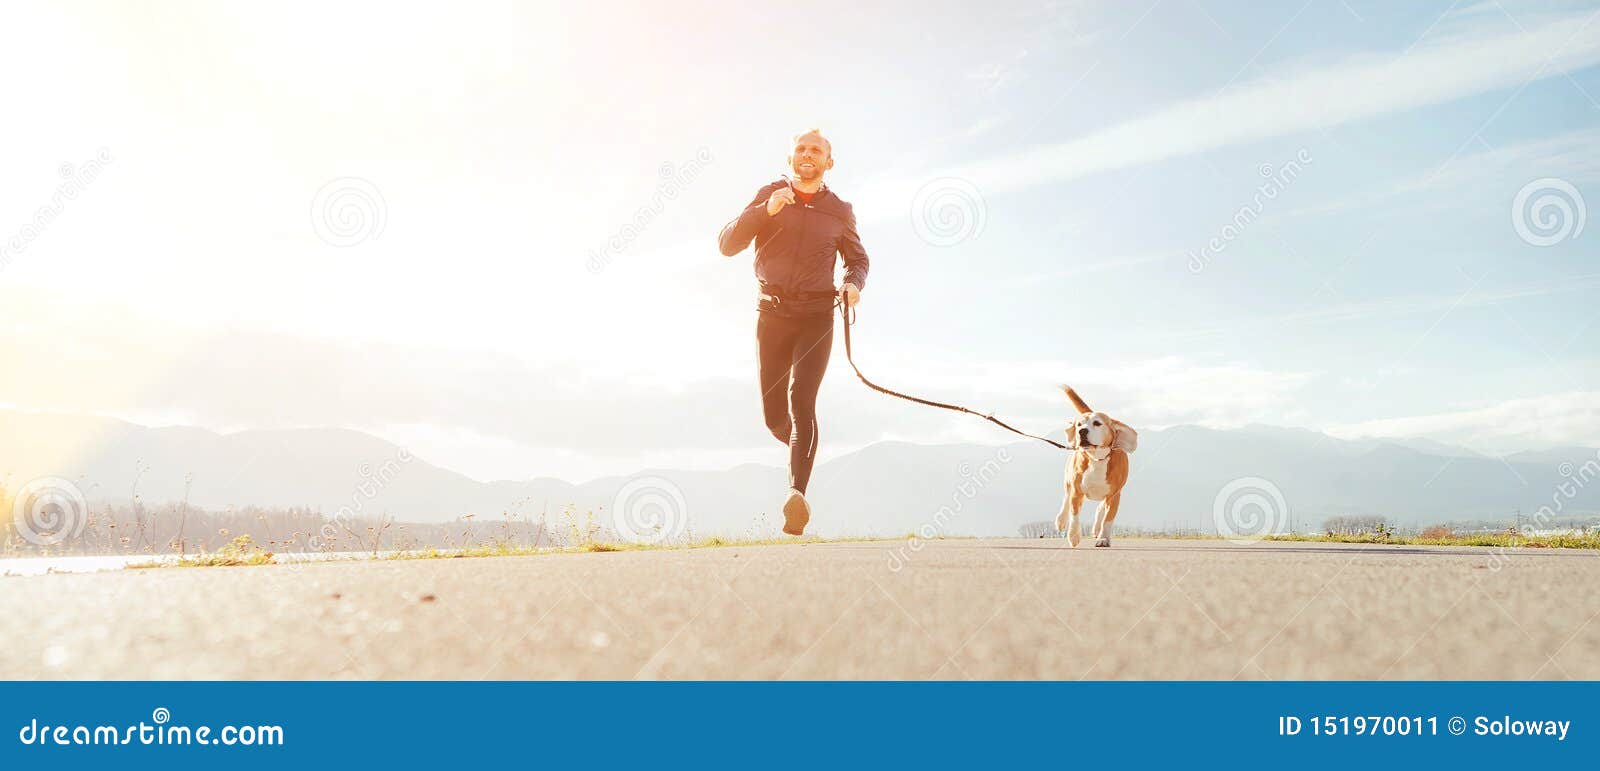 jogging man with his dog in the morning. active healthy lifestyle concept image